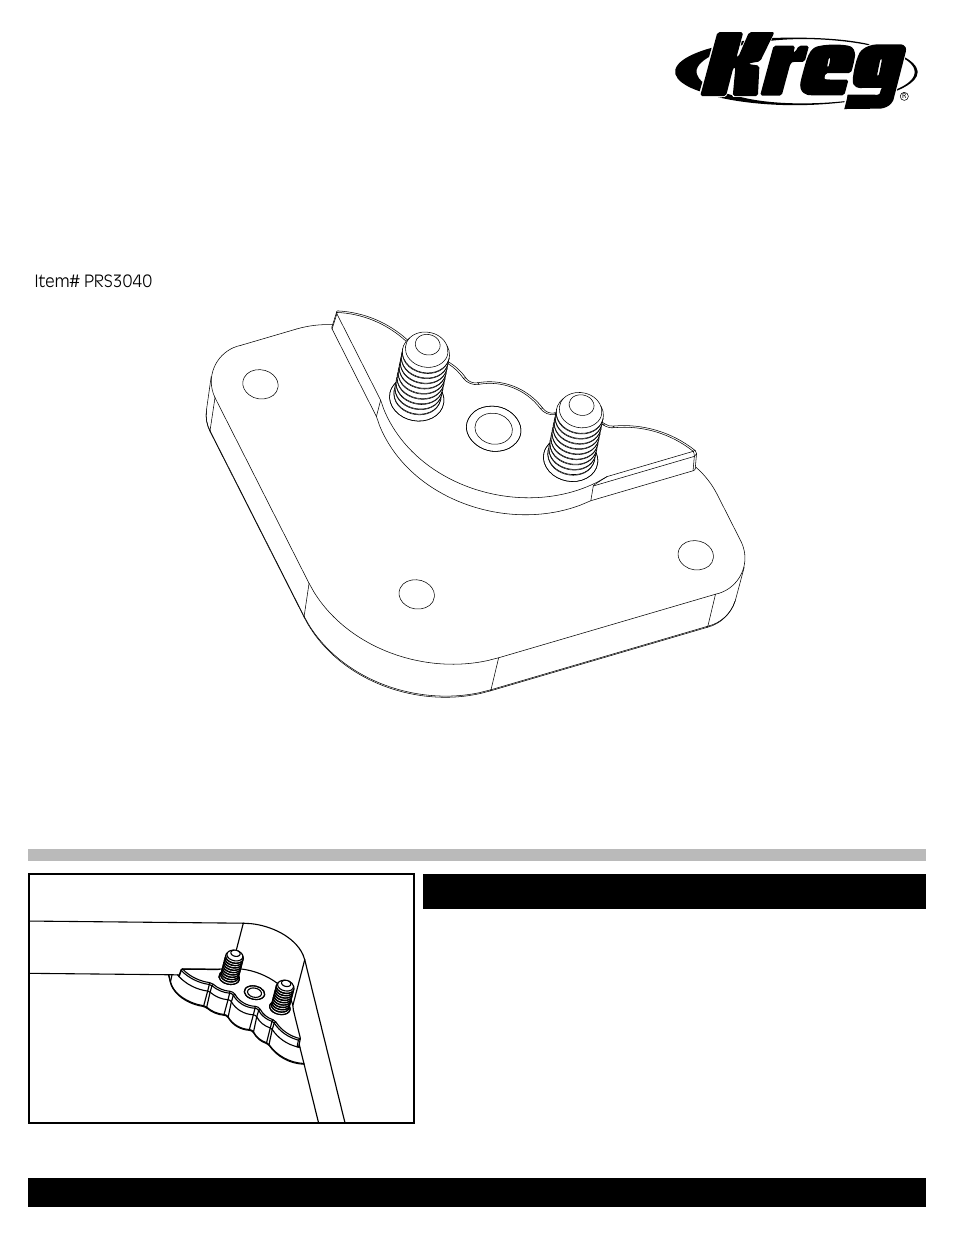 Kreg PRS3040 Precision Router Table Insert Plate Levelers User Manual | 2 pages